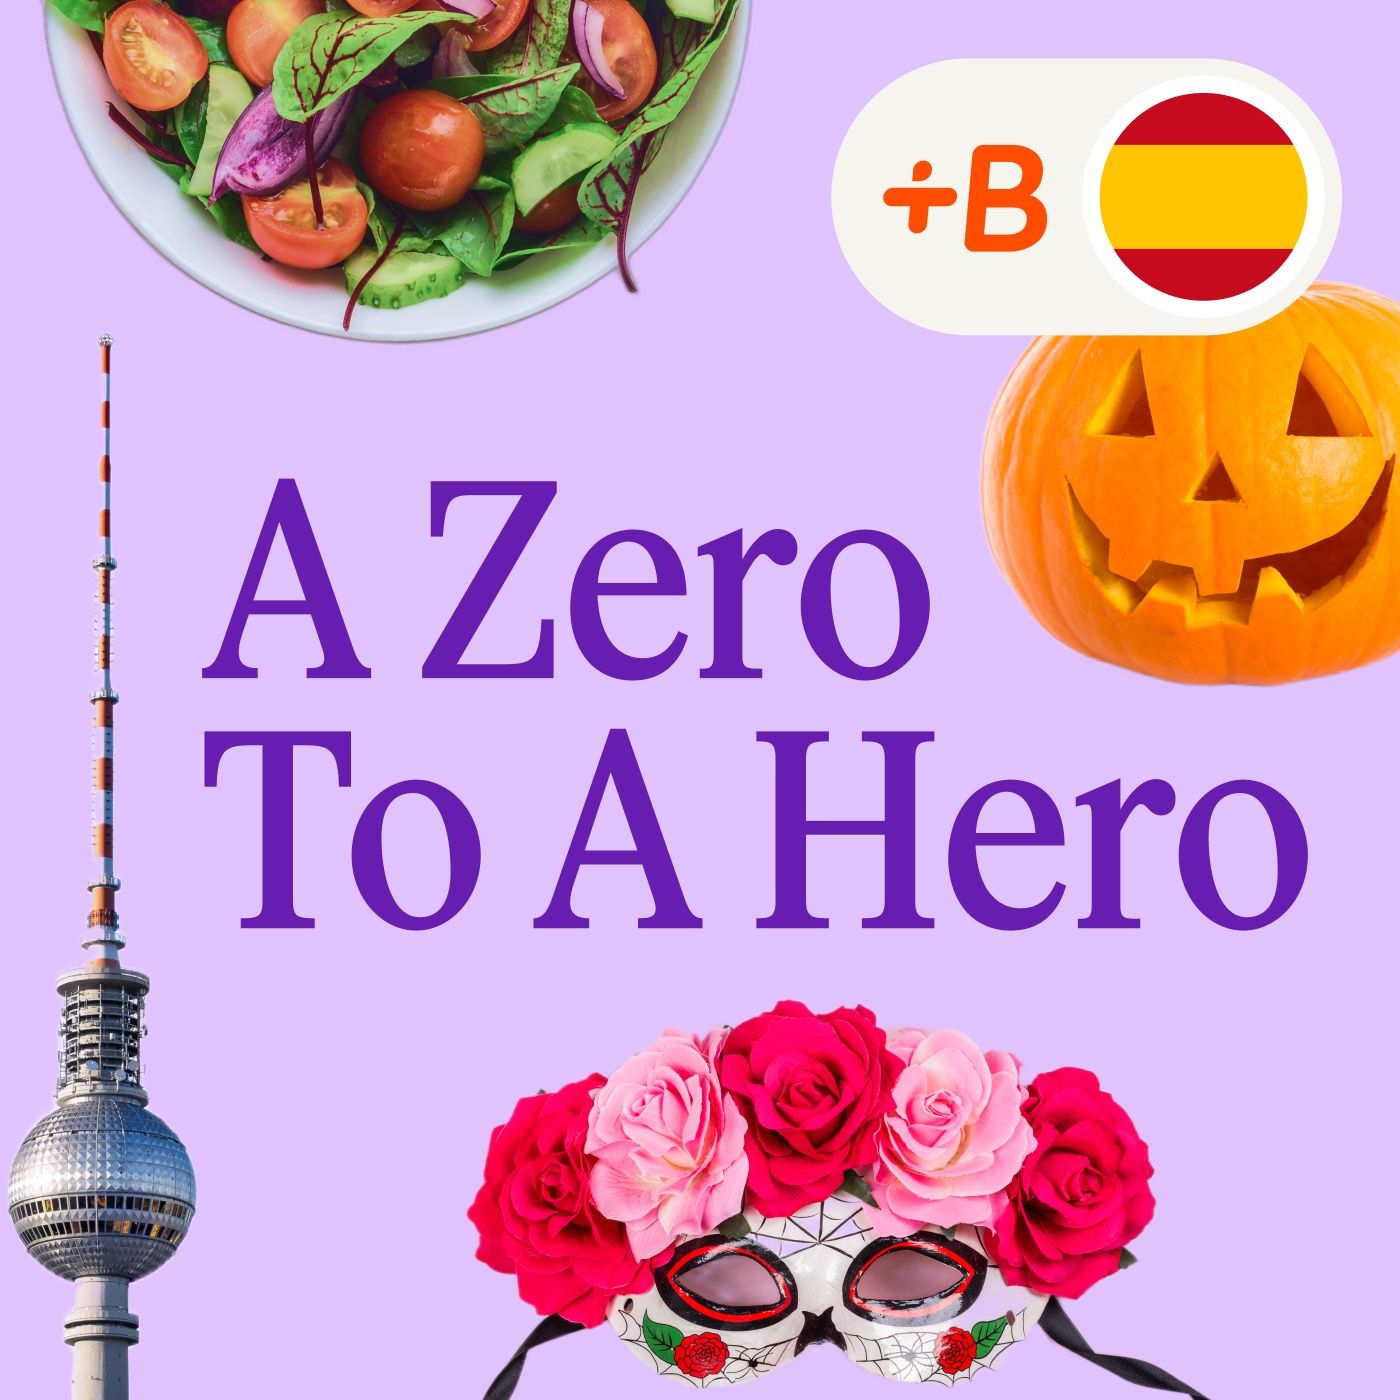 A Zero To A Hero: Learn Spanish!